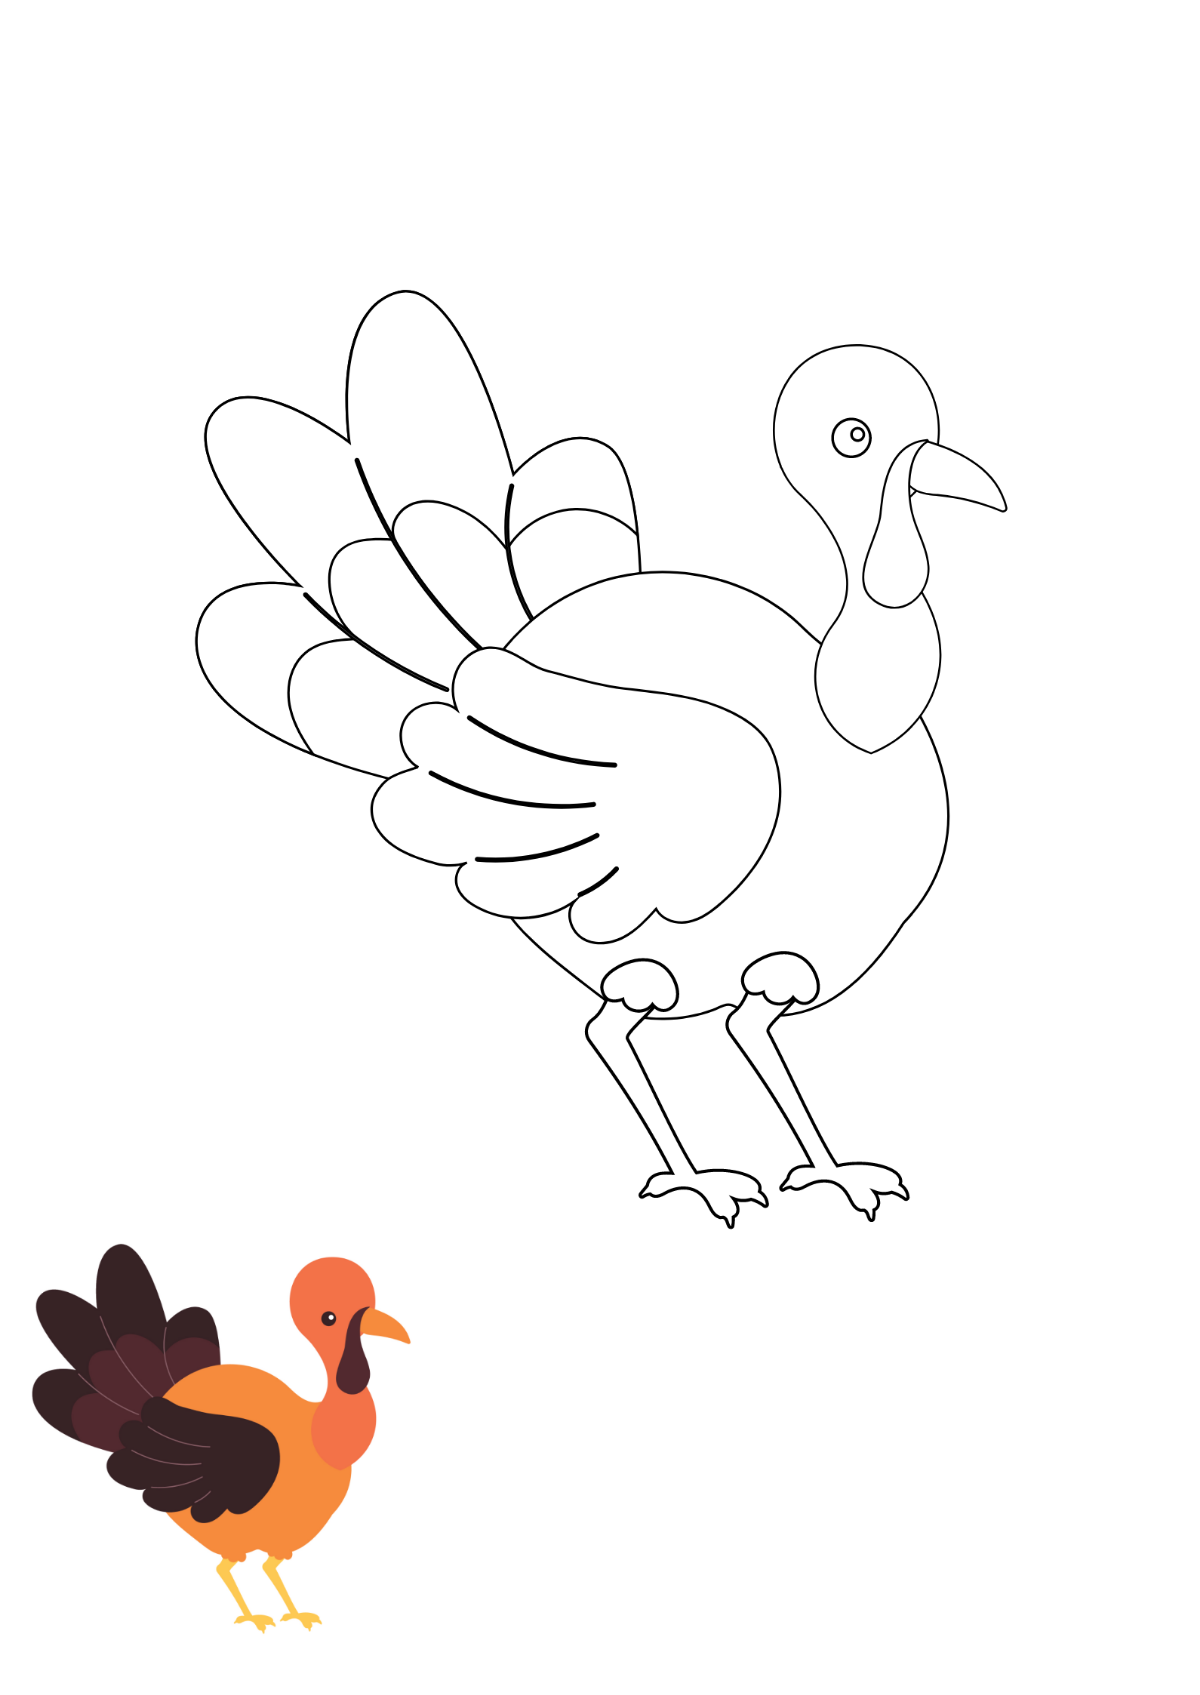 Free Blank Turkey Coloring Page Template